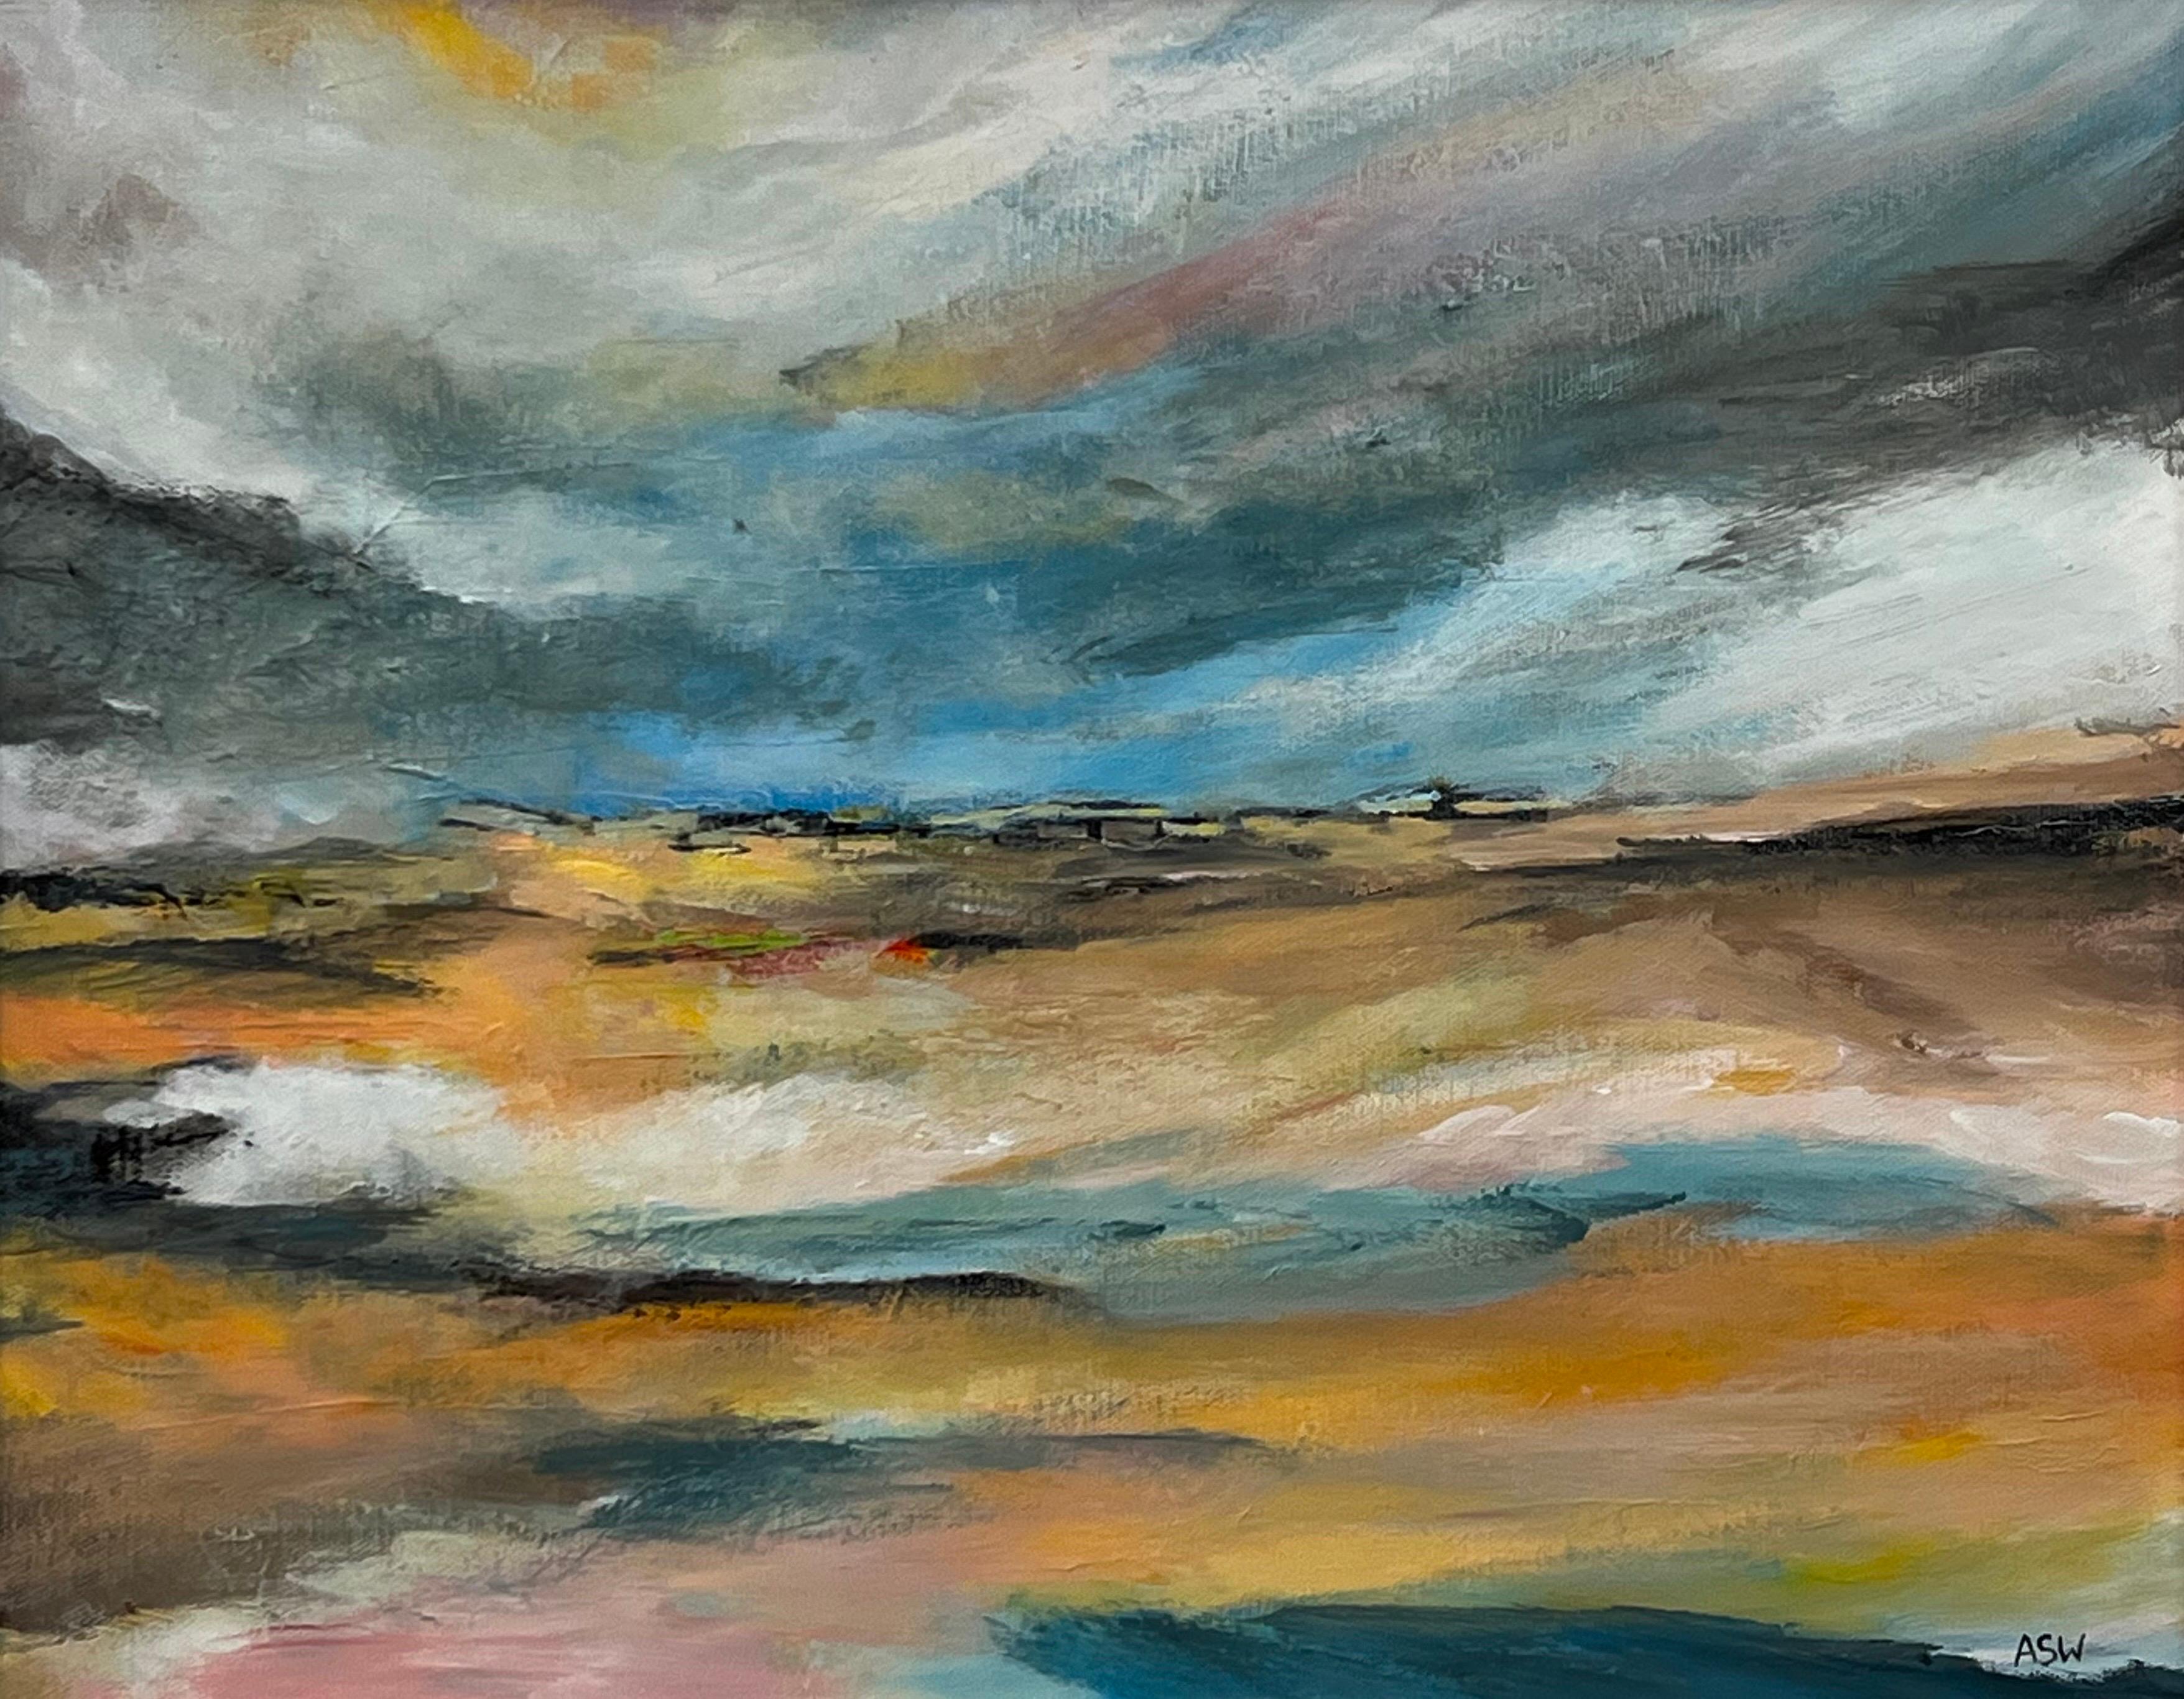 Atmospheric Abstract Landscape Seascape Art of England using Blue & Warm Yellows by Contemporary British Artist, Angela Wakefield. Entitled 'Serenity #07', this atmospheric painting depicts an imagined desolate moorland scene using muted pastel